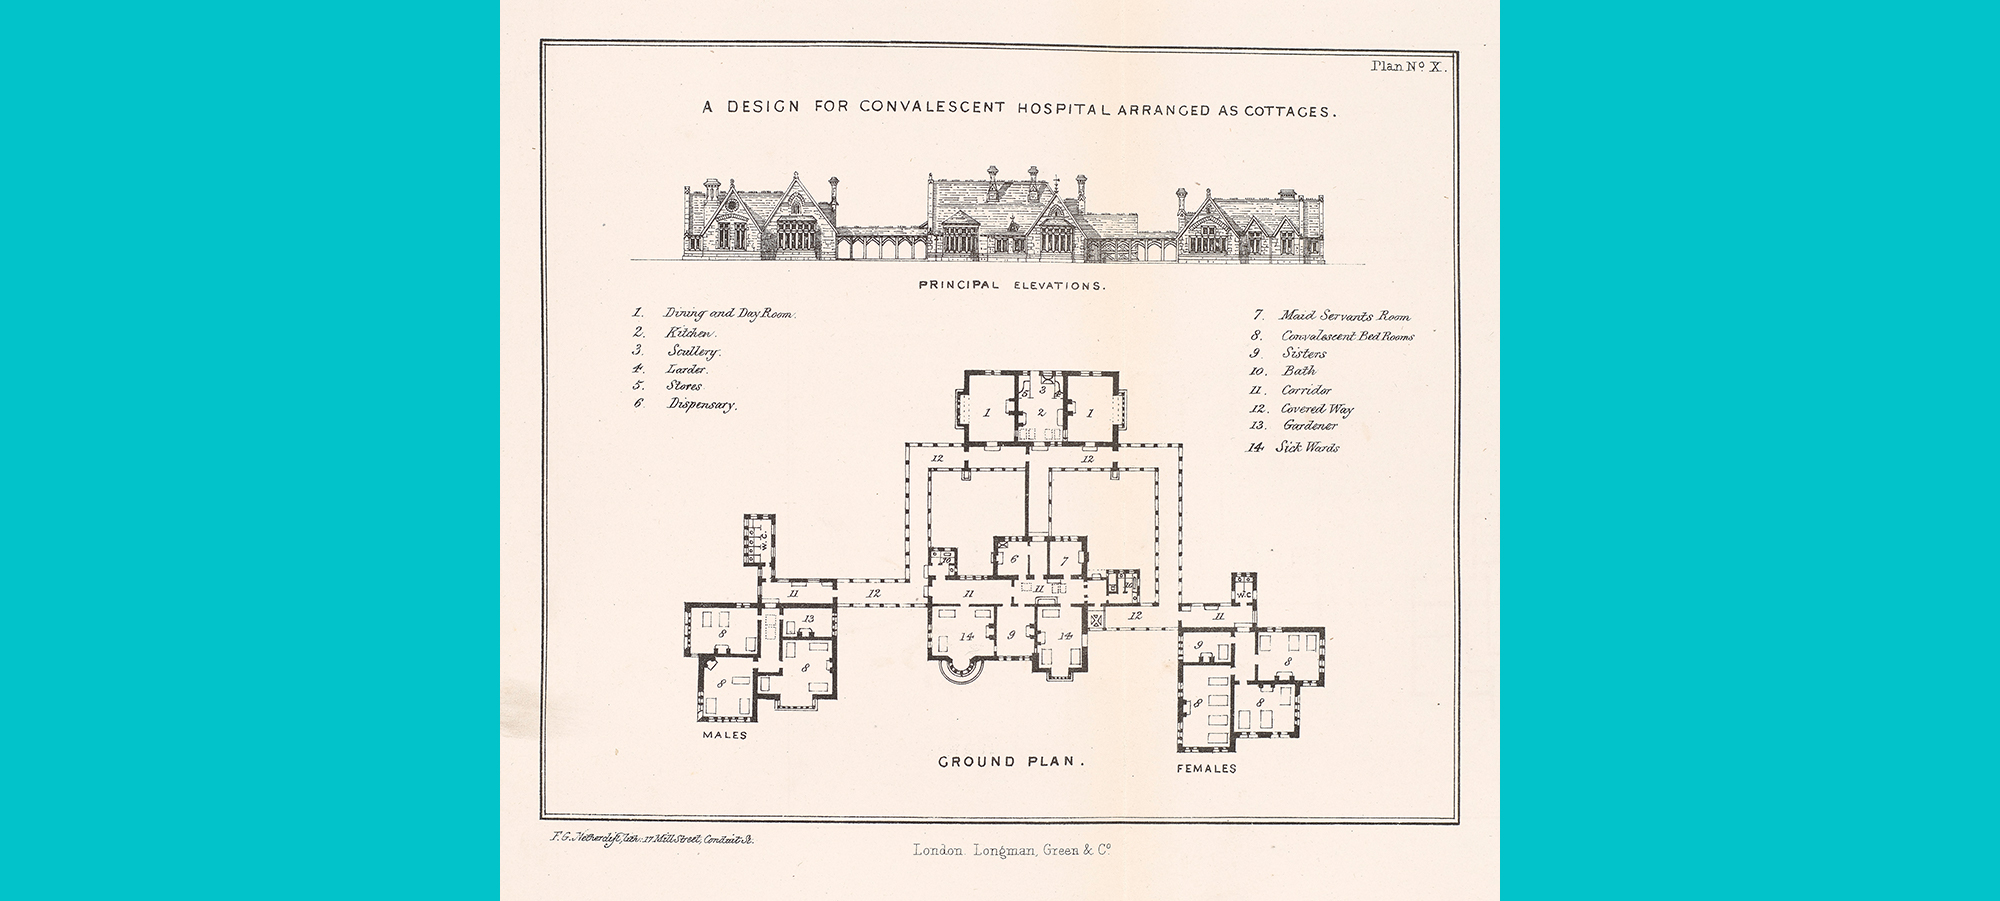 scan of a drawn birds eye architectural plan of a convalescent hospital